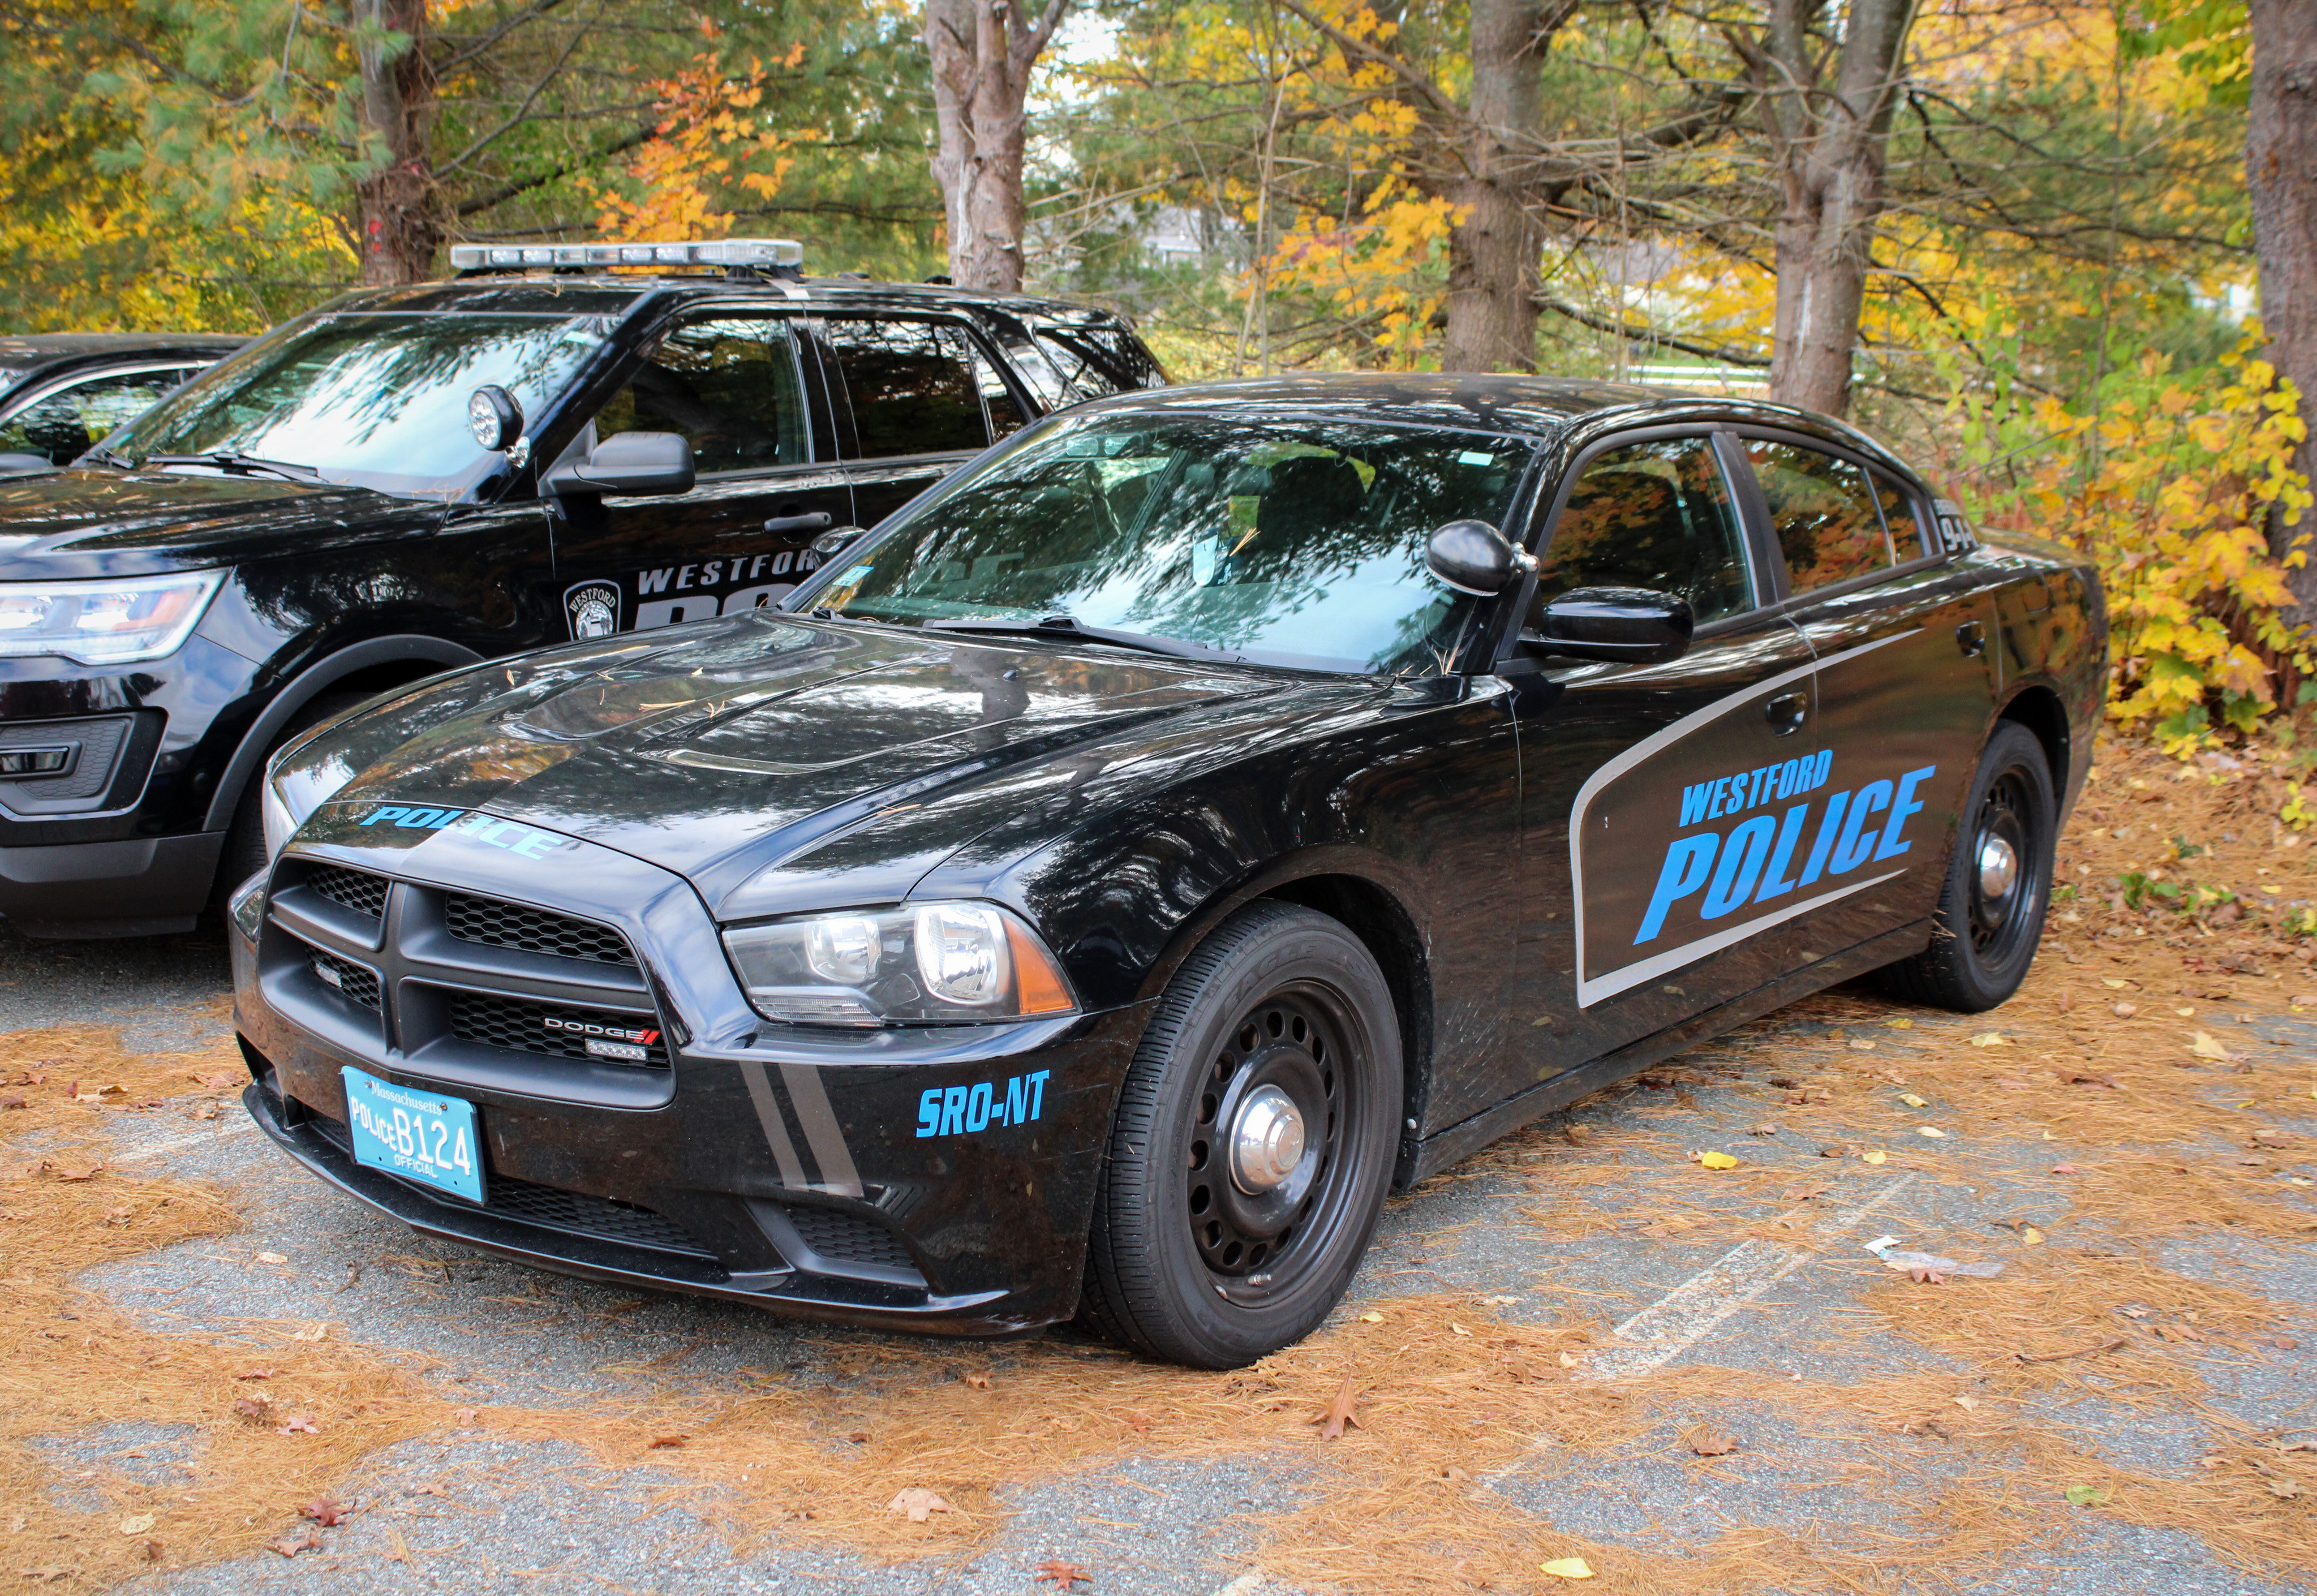 A photo  of Westford Police
            SRO-NT, a 2014 Dodge Charger             taken by Nicholas You